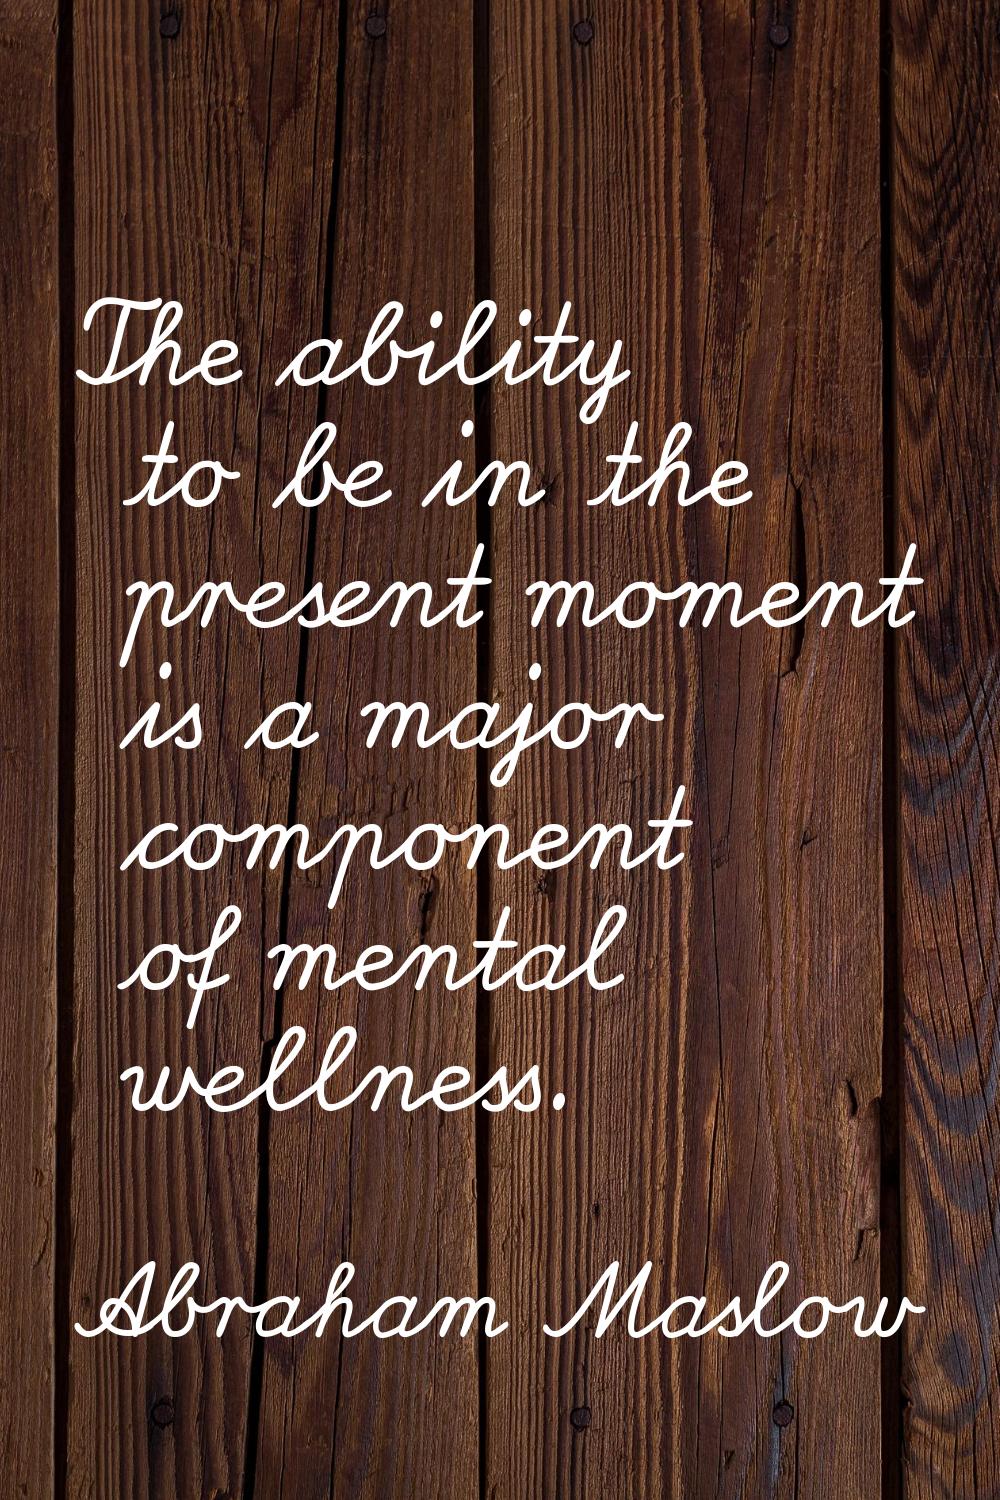 The ability to be in the present moment is a major component of mental wellness.